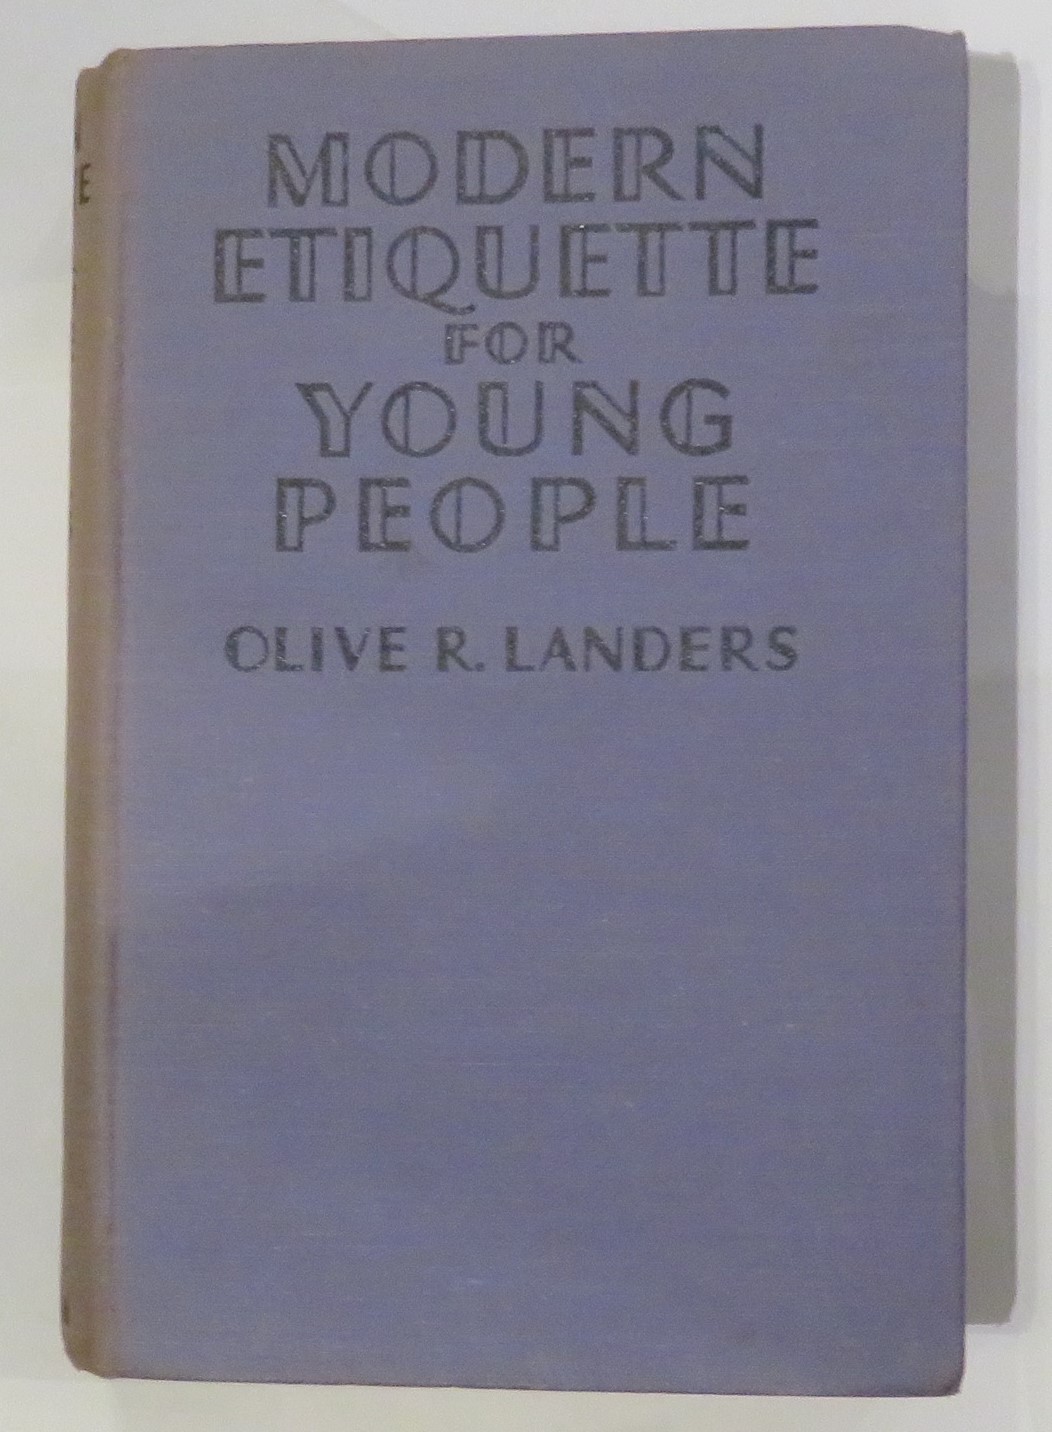 Modern Etiquette for Young People